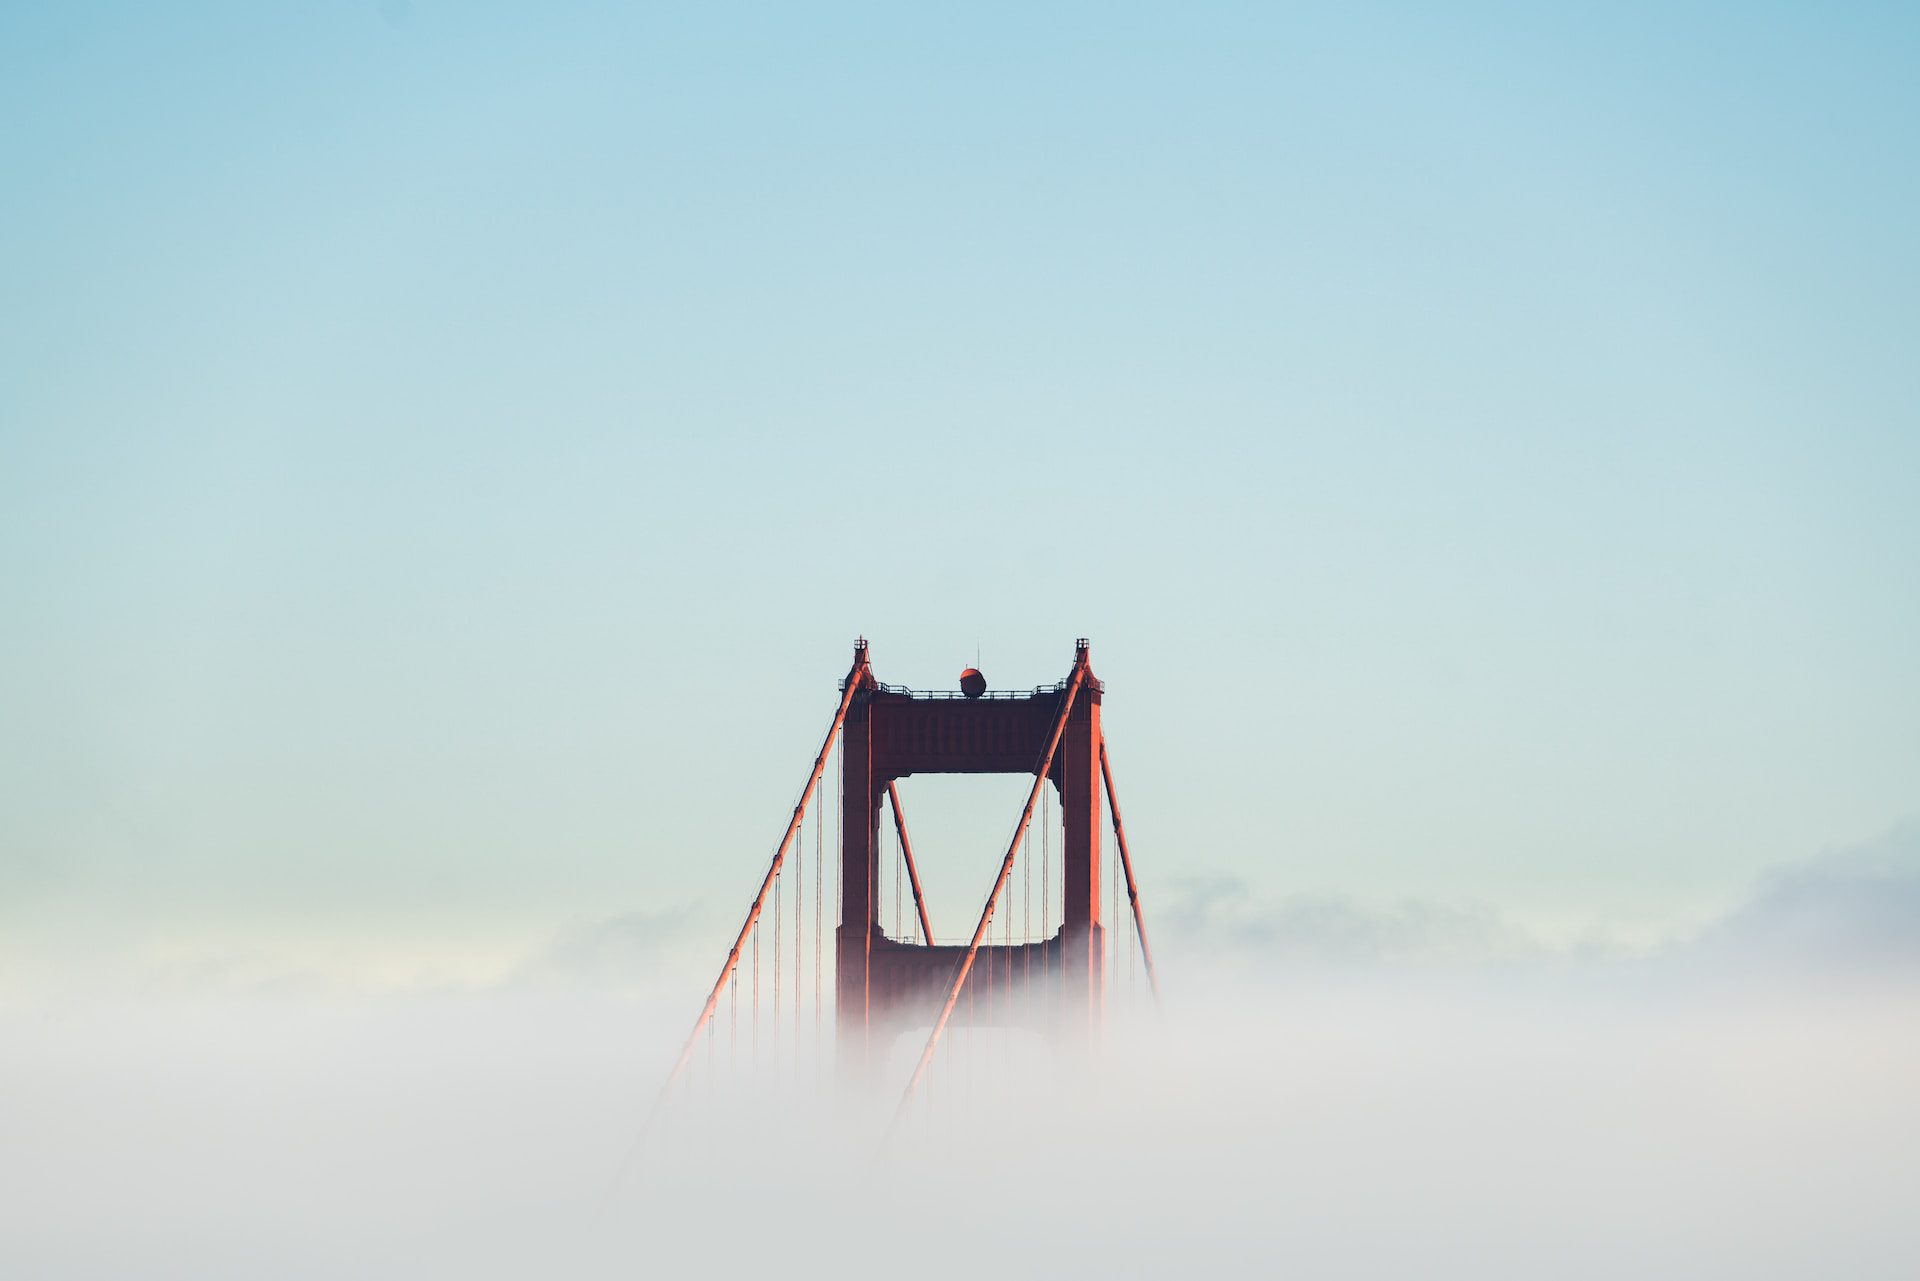 It's the Golden Gate bridge, popping up over the clouds. Visual metaphor.